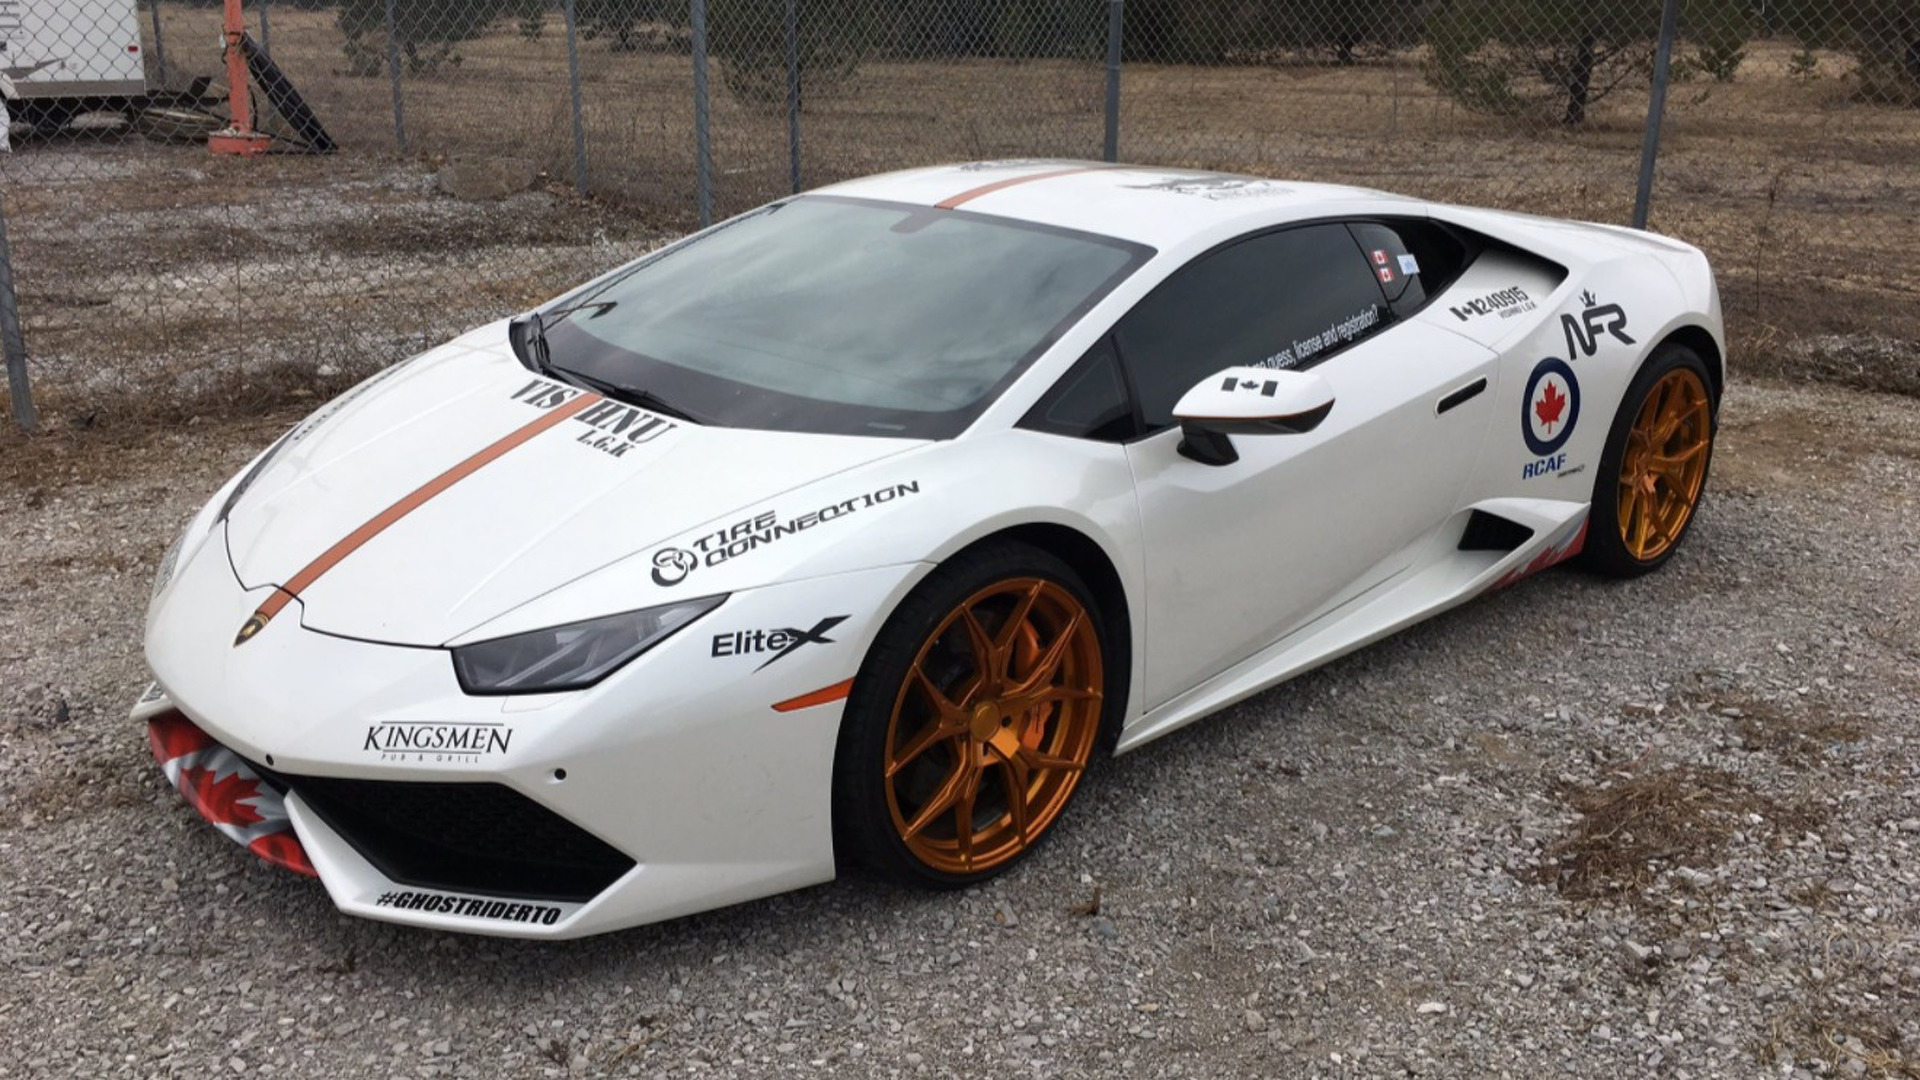 Dozen Exotic And Luxury Sports Cars Impounded For Street Racing